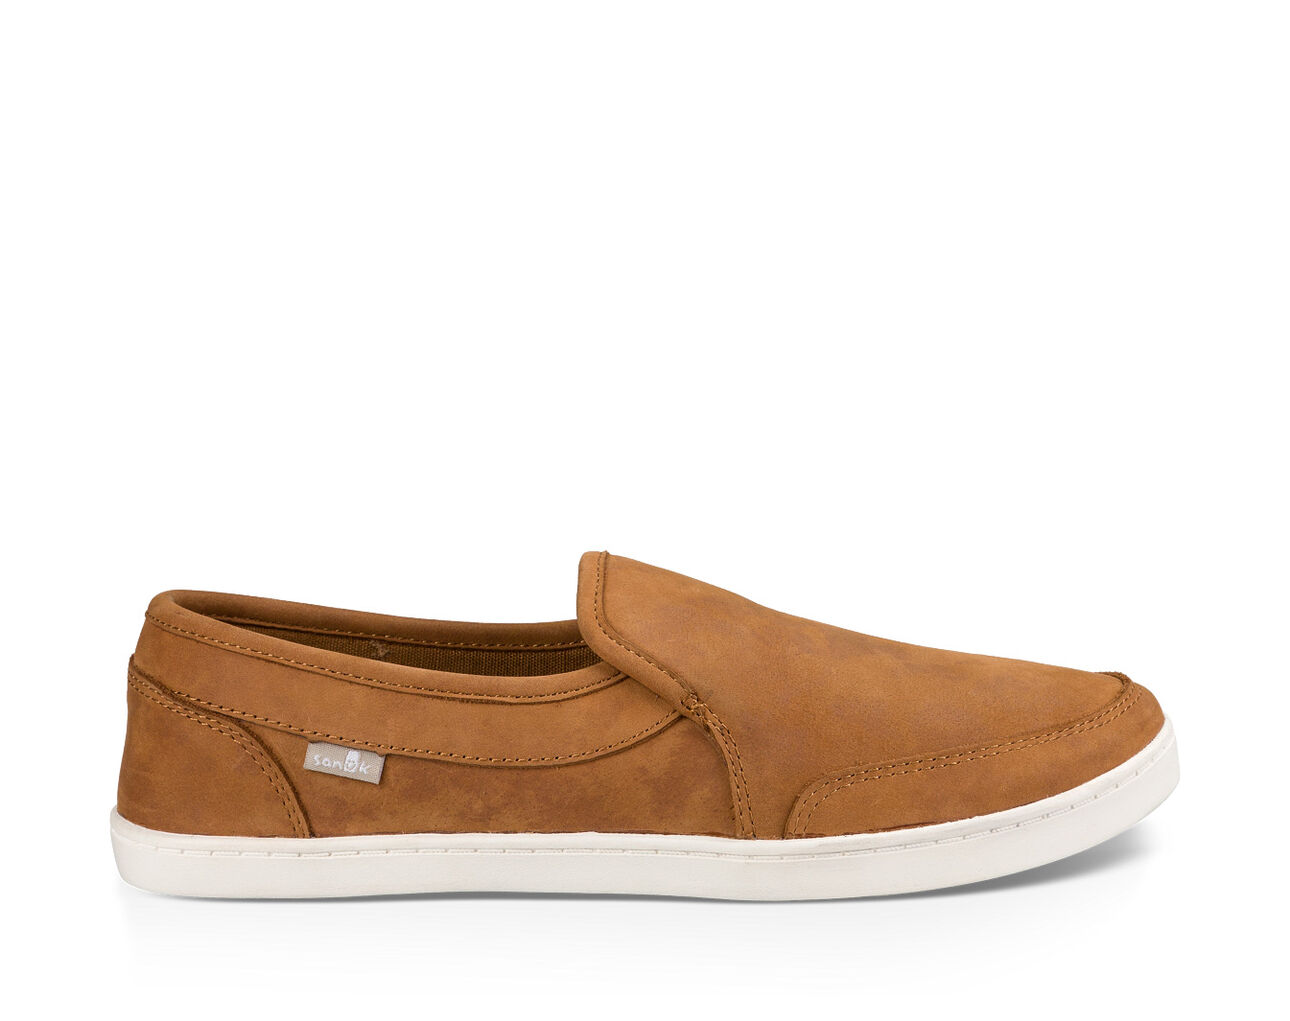 Women's Pair O Dice Leather Slip-on Sneakers | Sanuk® Official